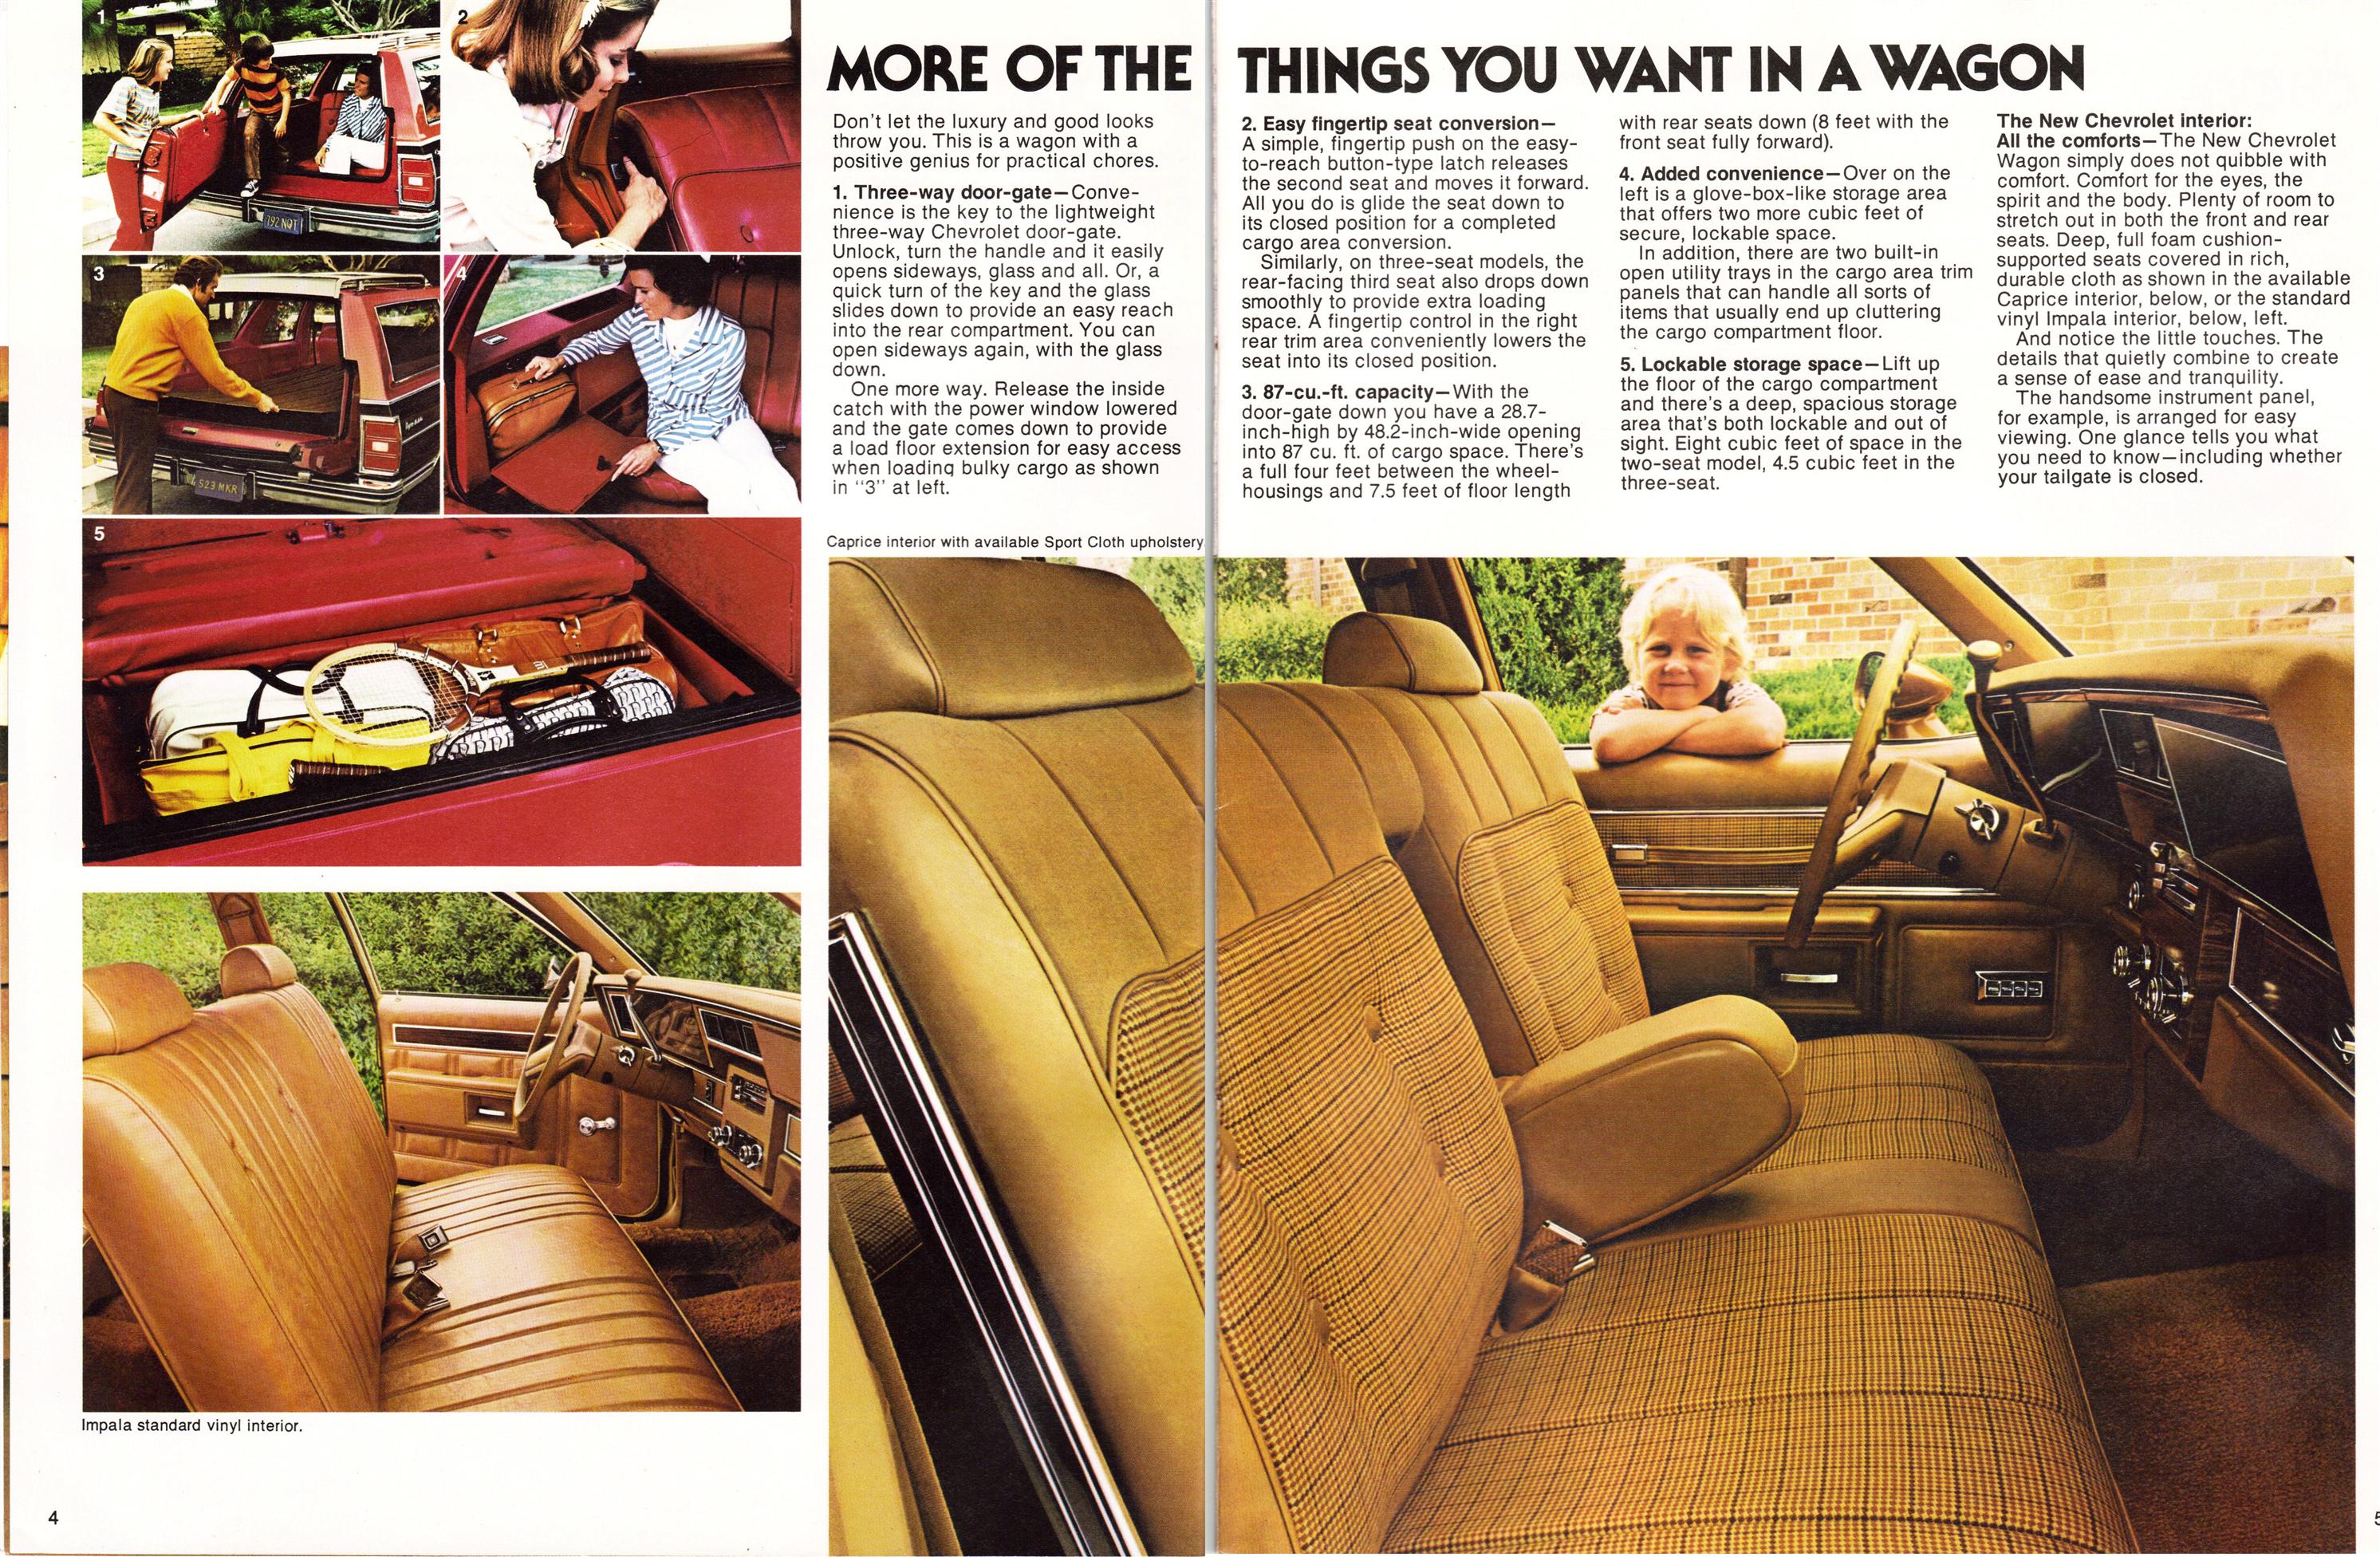 1978 Chevrolet Wagons Brochure Page 5